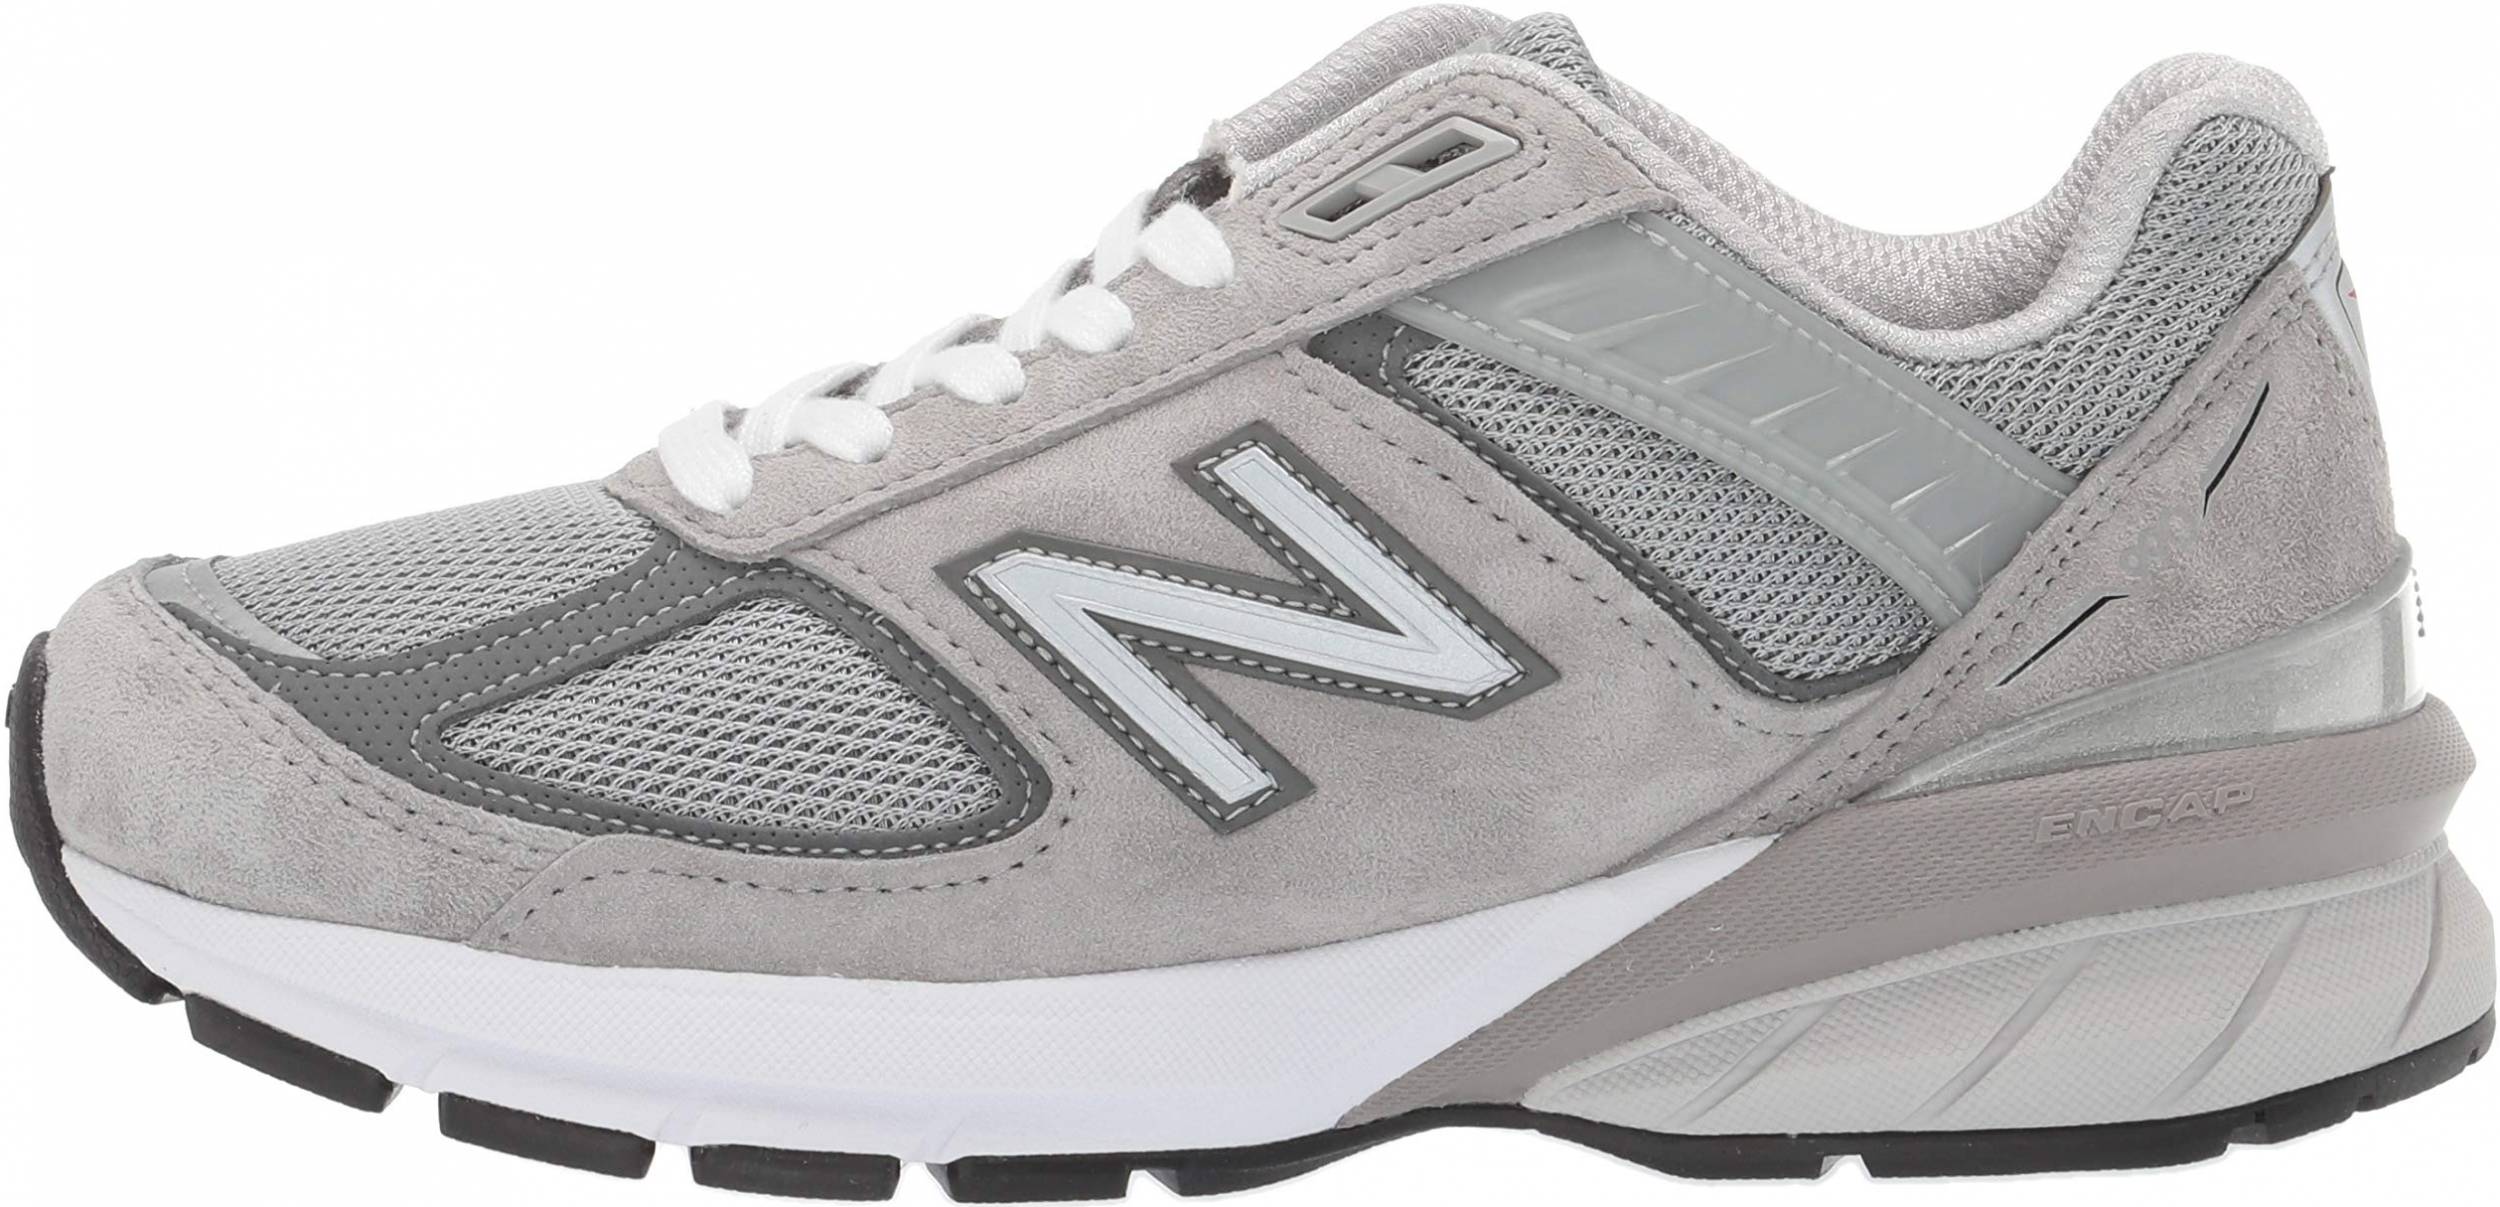 New Balance 990 v5 sneakers in 10+ colors (only $170) | RunRepeat